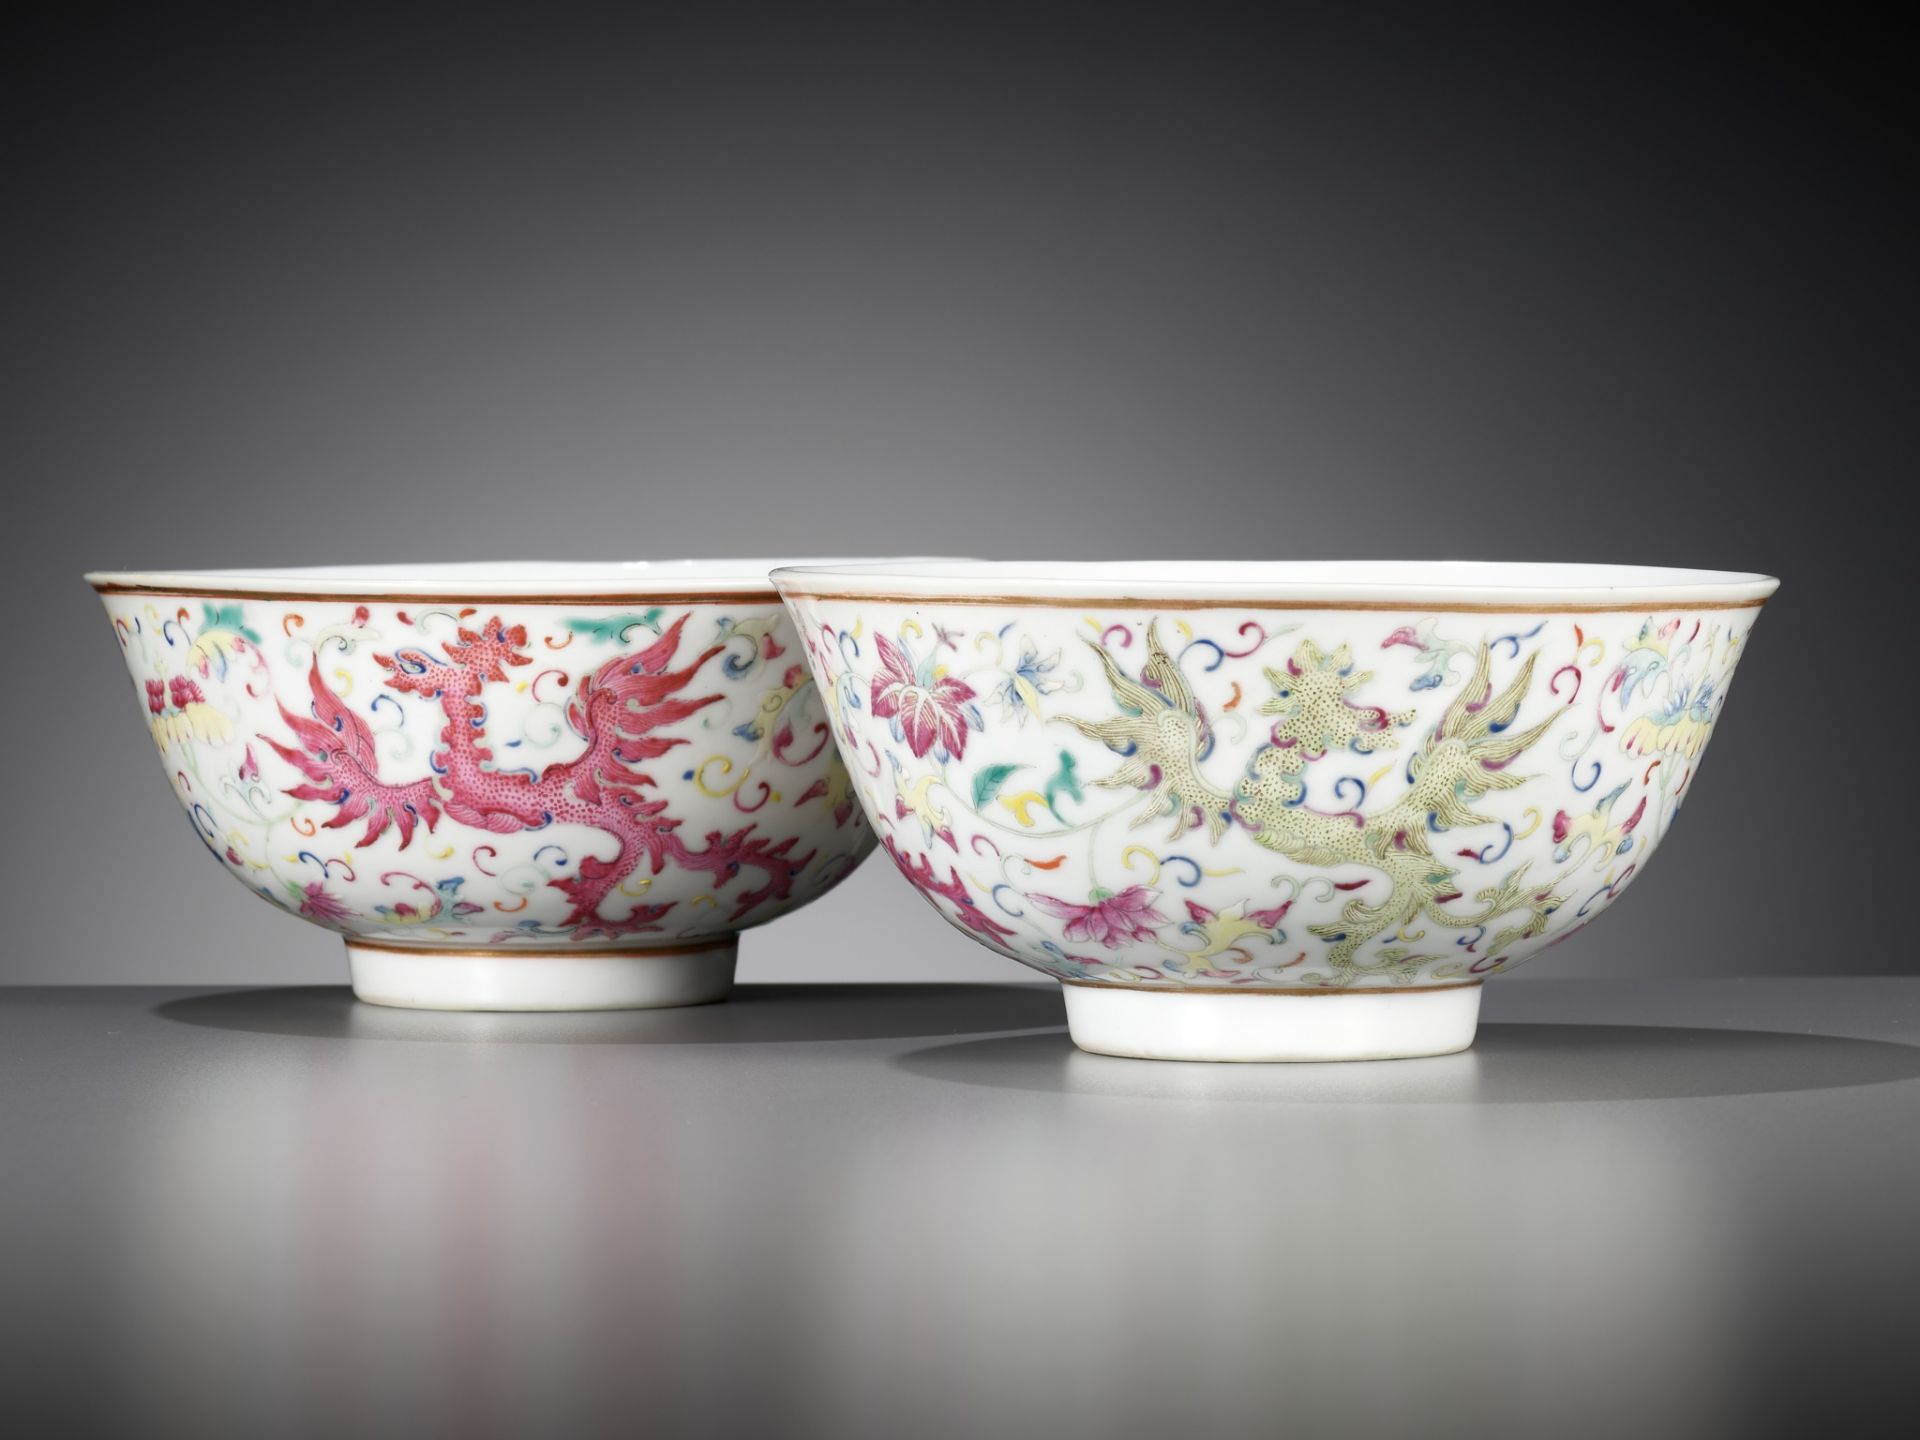 A PAIR OF FAMILLE-ROSE 'PHOENIX' BOWLS, GUANGXU MARK AND PERIOD